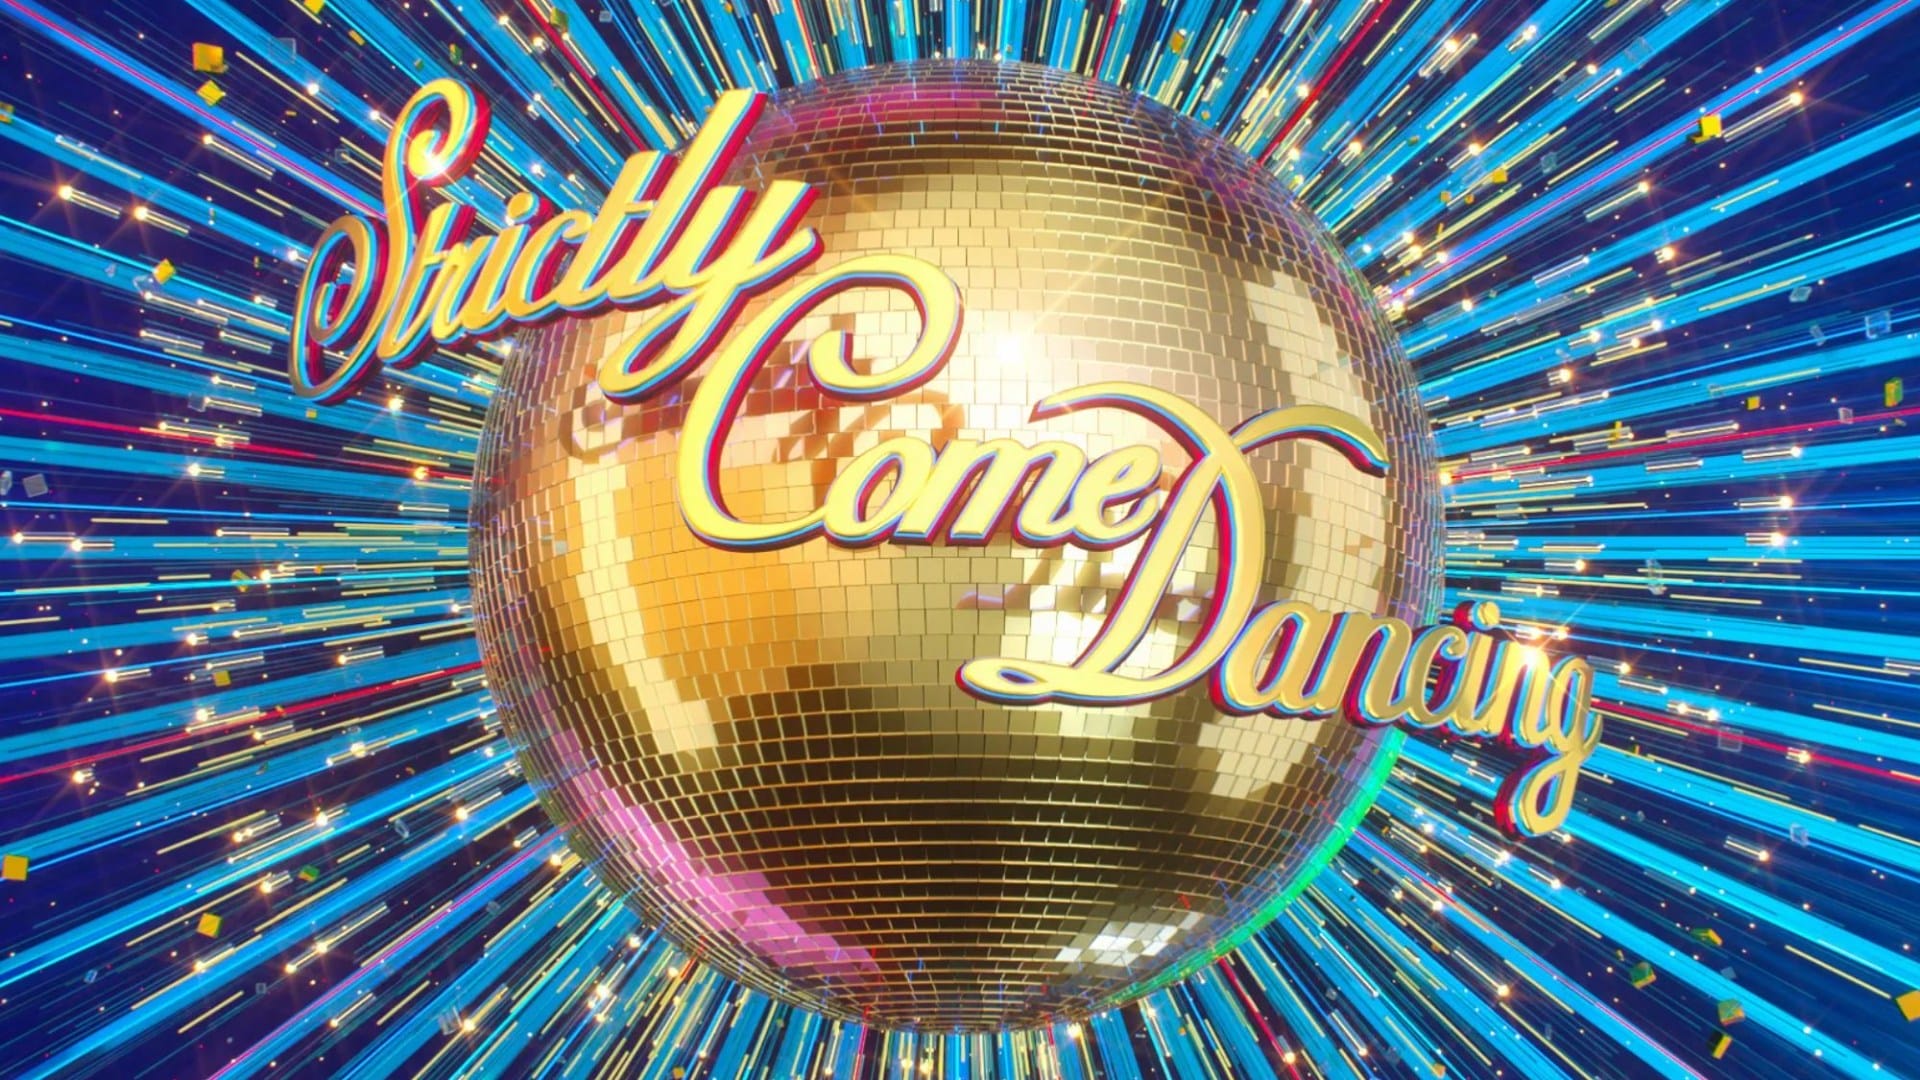 Strictly Come Dancing star leaves fans devastated as he quits hit show after seven years